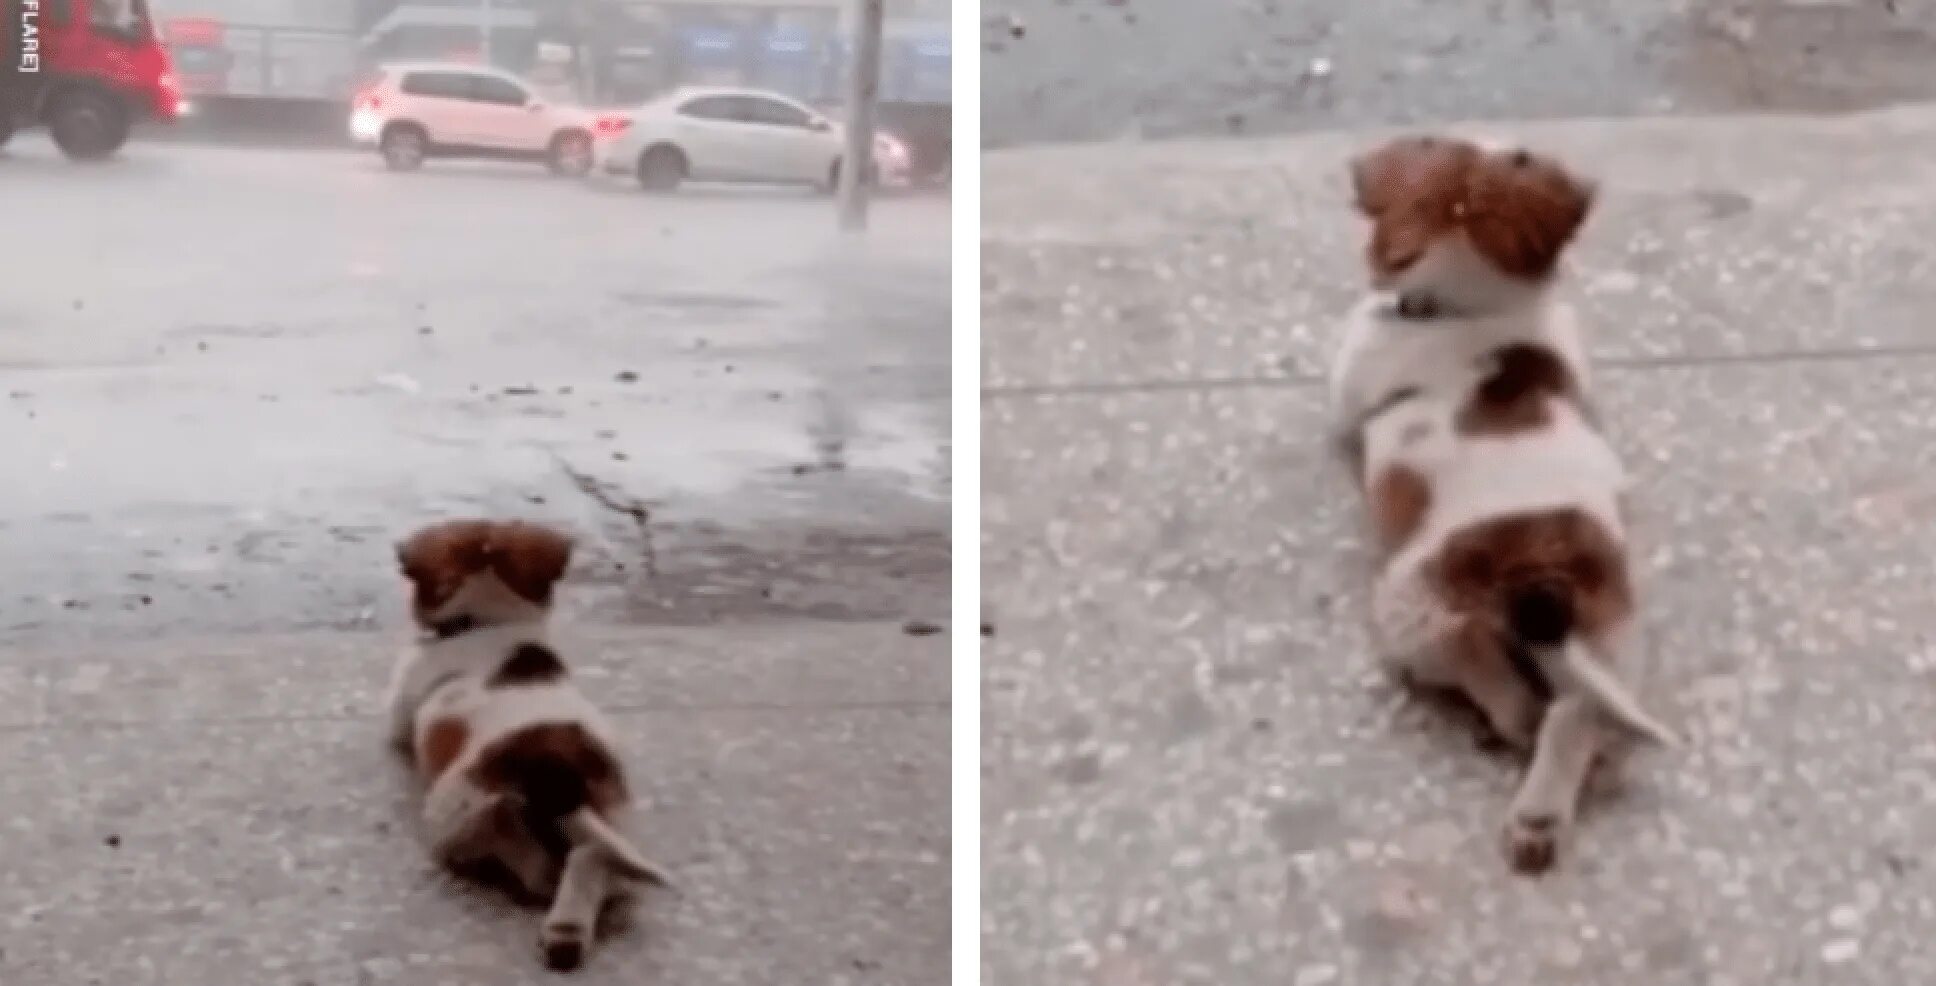 tho “The Endearing Charm of an Adorable Dog: Widely Circulated Video Captures Its Charming Image, Lying with Crossed Paws under the Rain, Patiently Awaiting Its Owner, Creating a Heartwarming Scene that Melts the Hearts of the Online Community.” tho